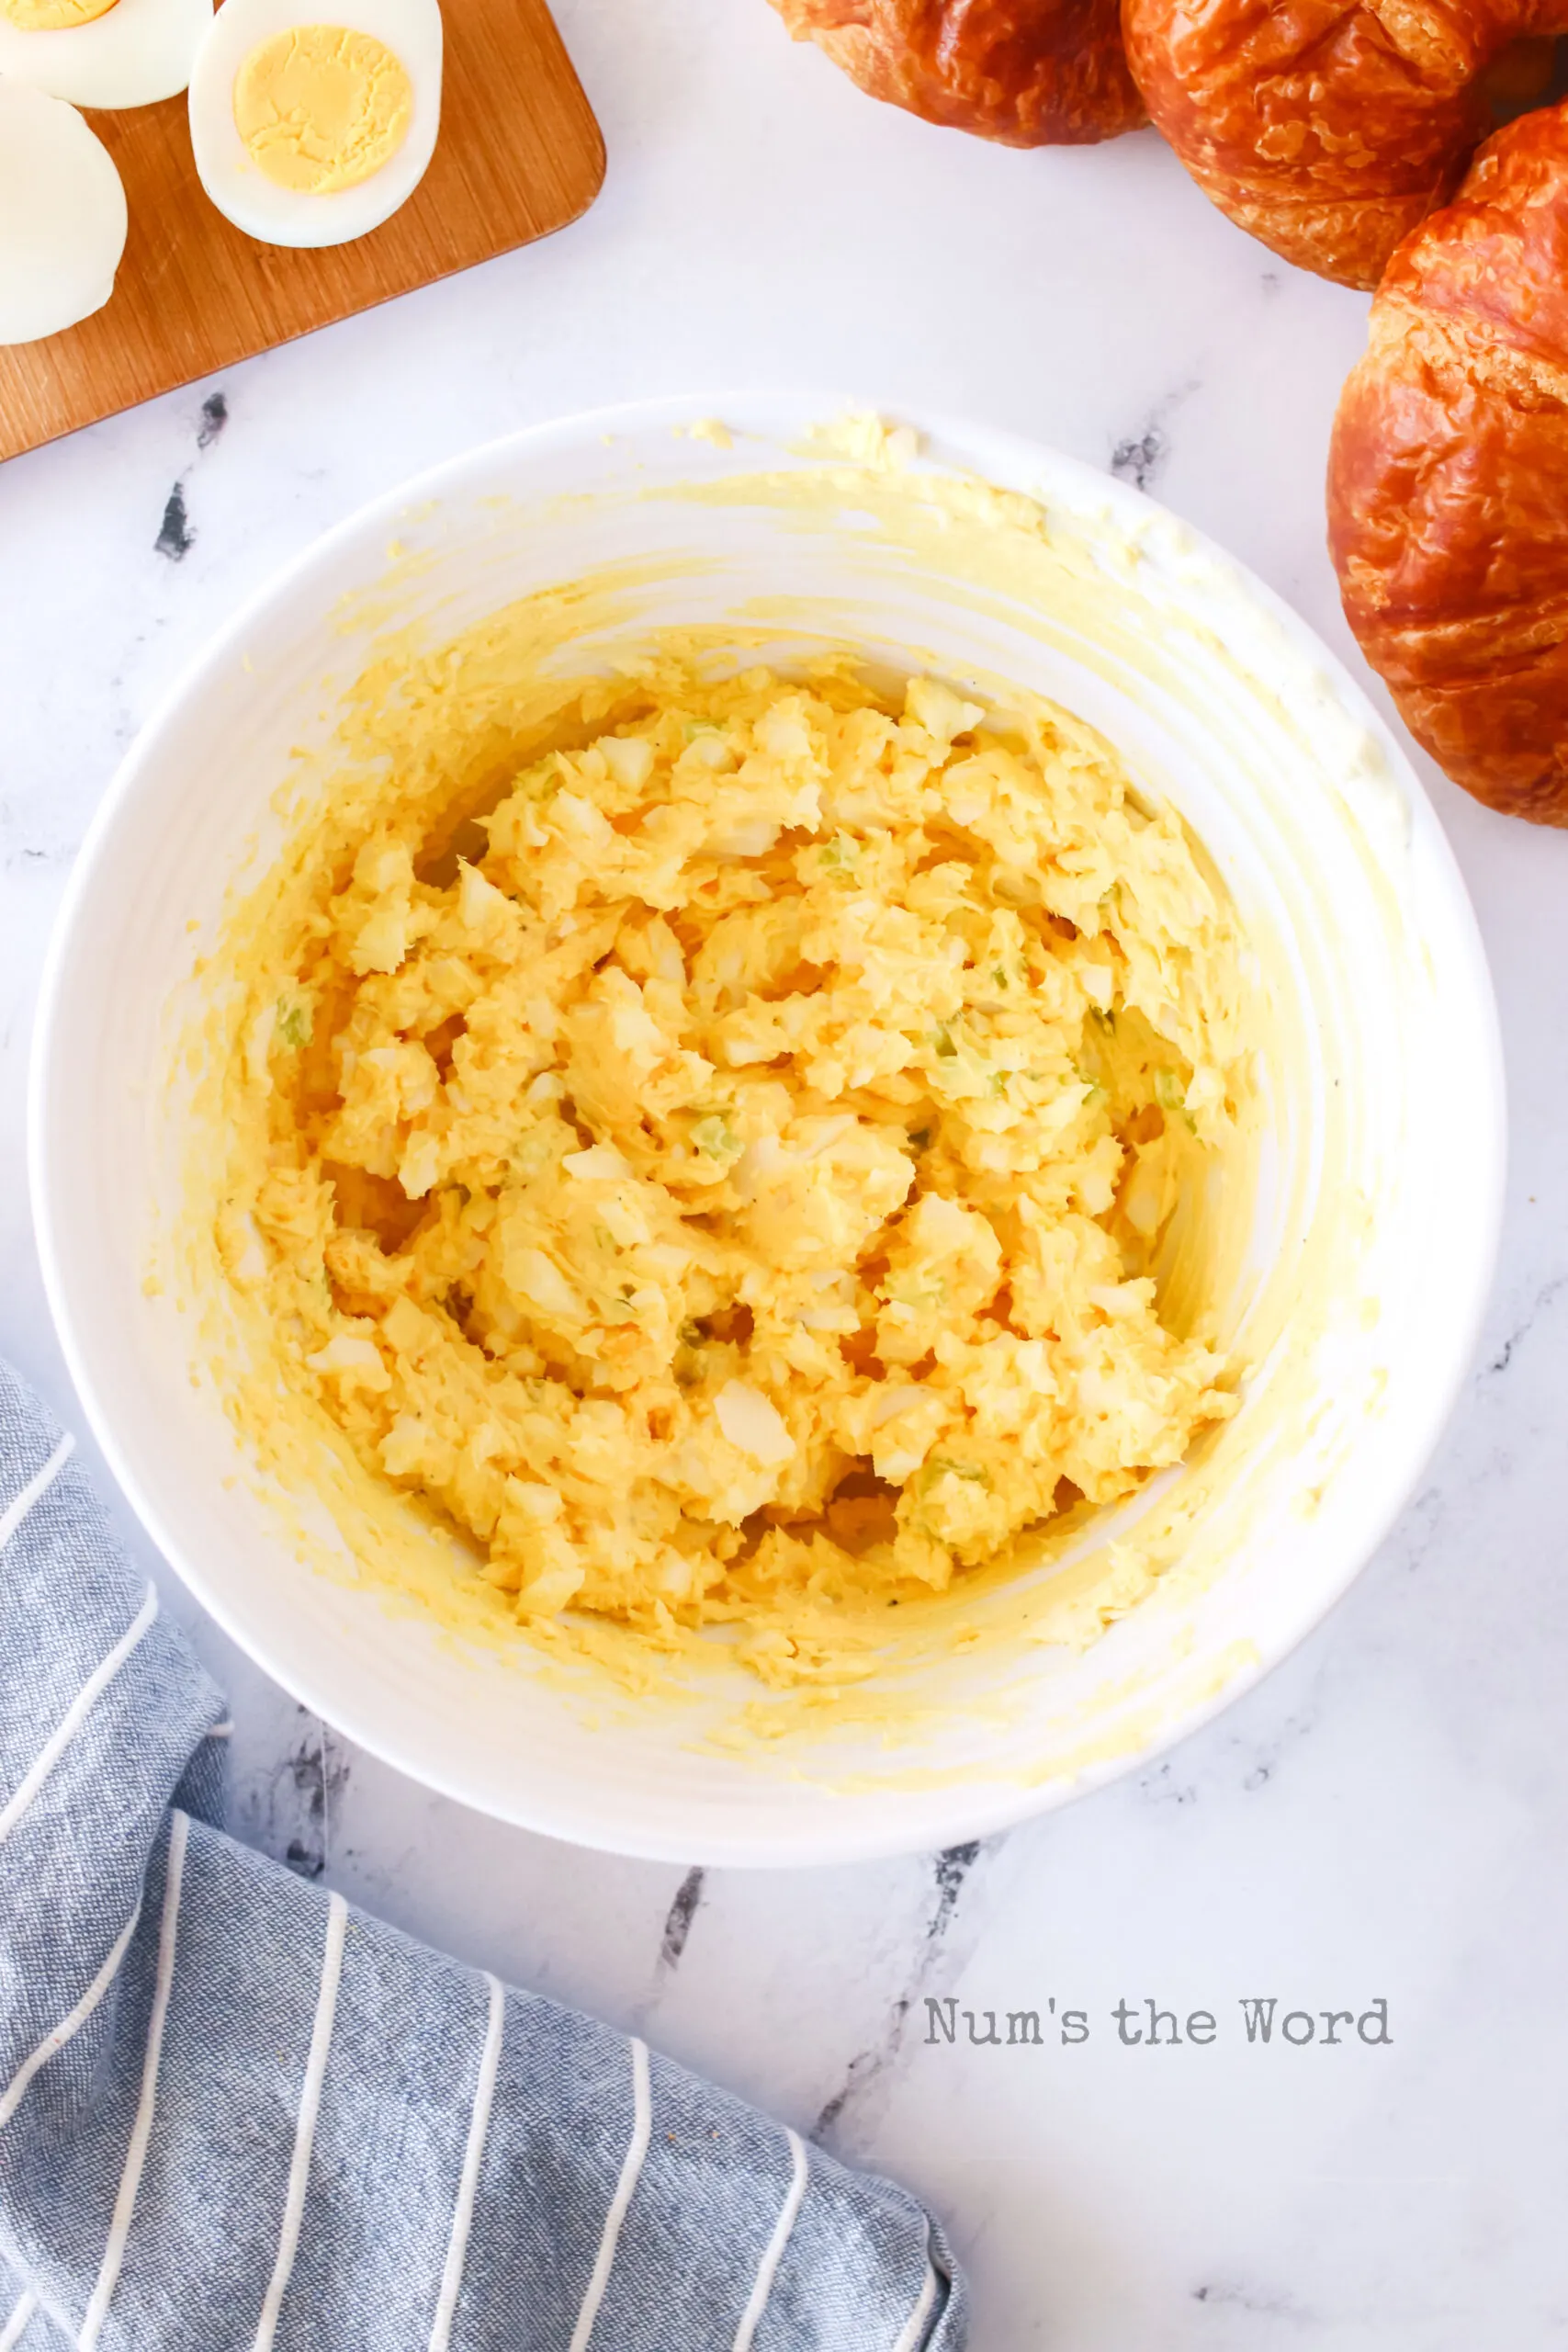 egg salad mixed up and ready to be served with crackers or added to bread.